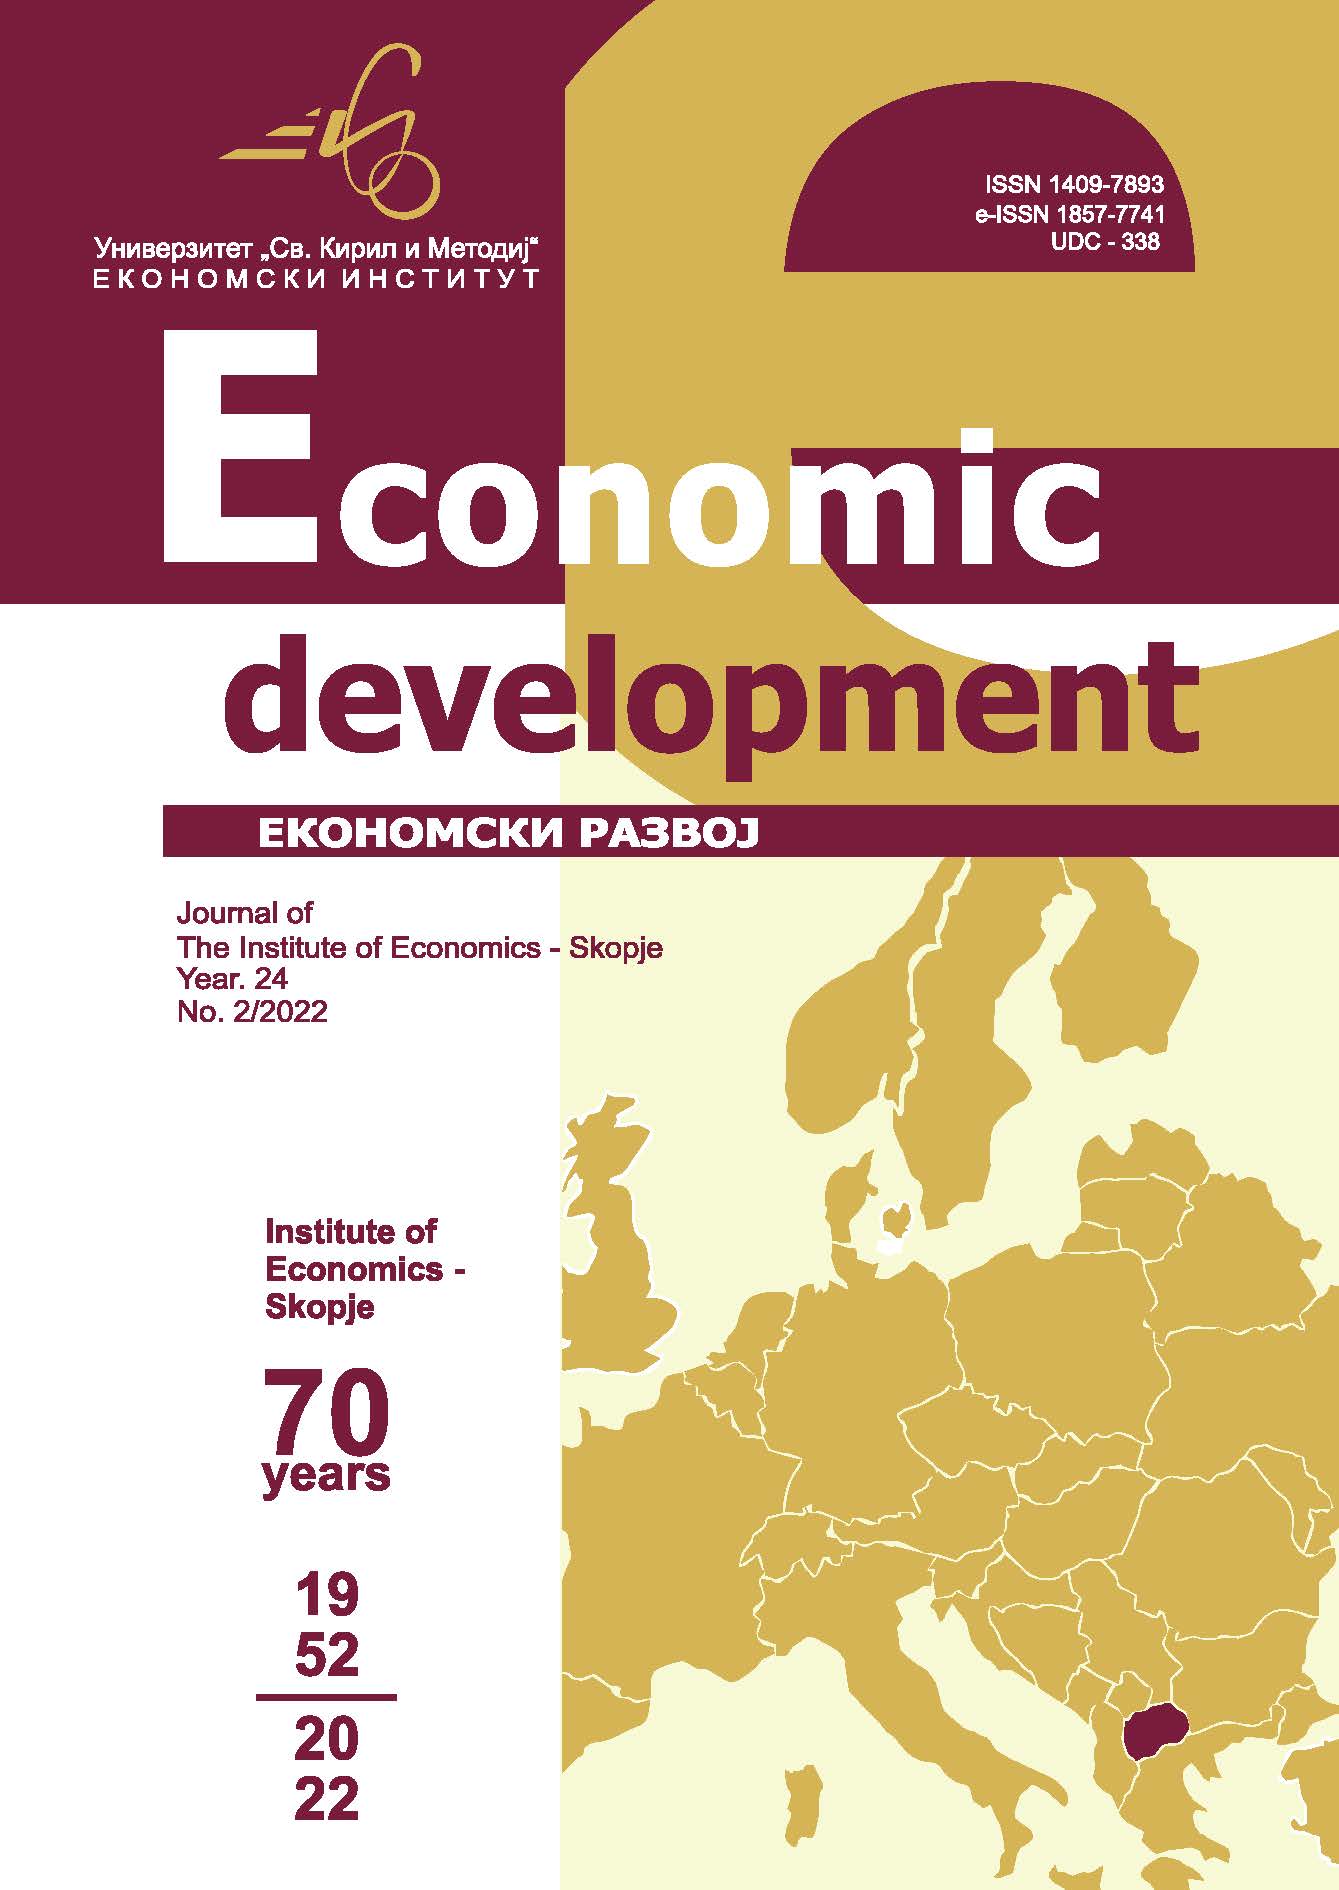 THE IMPACT OF ECONOMIC DOWNTURN ON HUMAN RESOURCE POLICIES IN SMALL BUSINESSES: THE CASE OF NORTH MACEDONIA